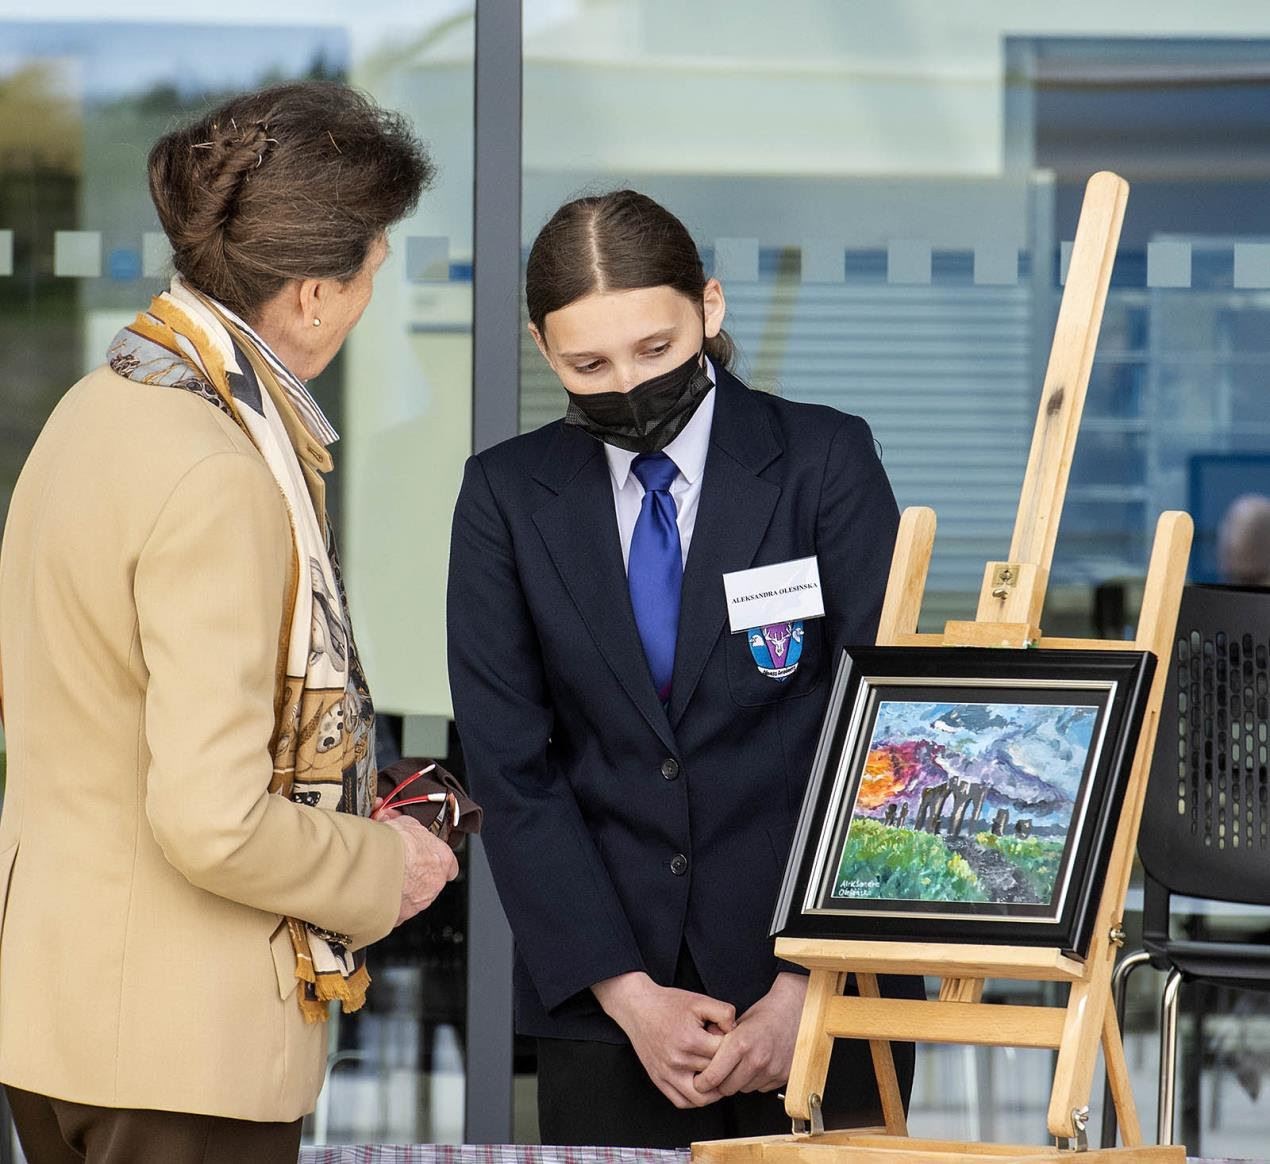 The princess was also presented with a drawing as thanks for her visit.